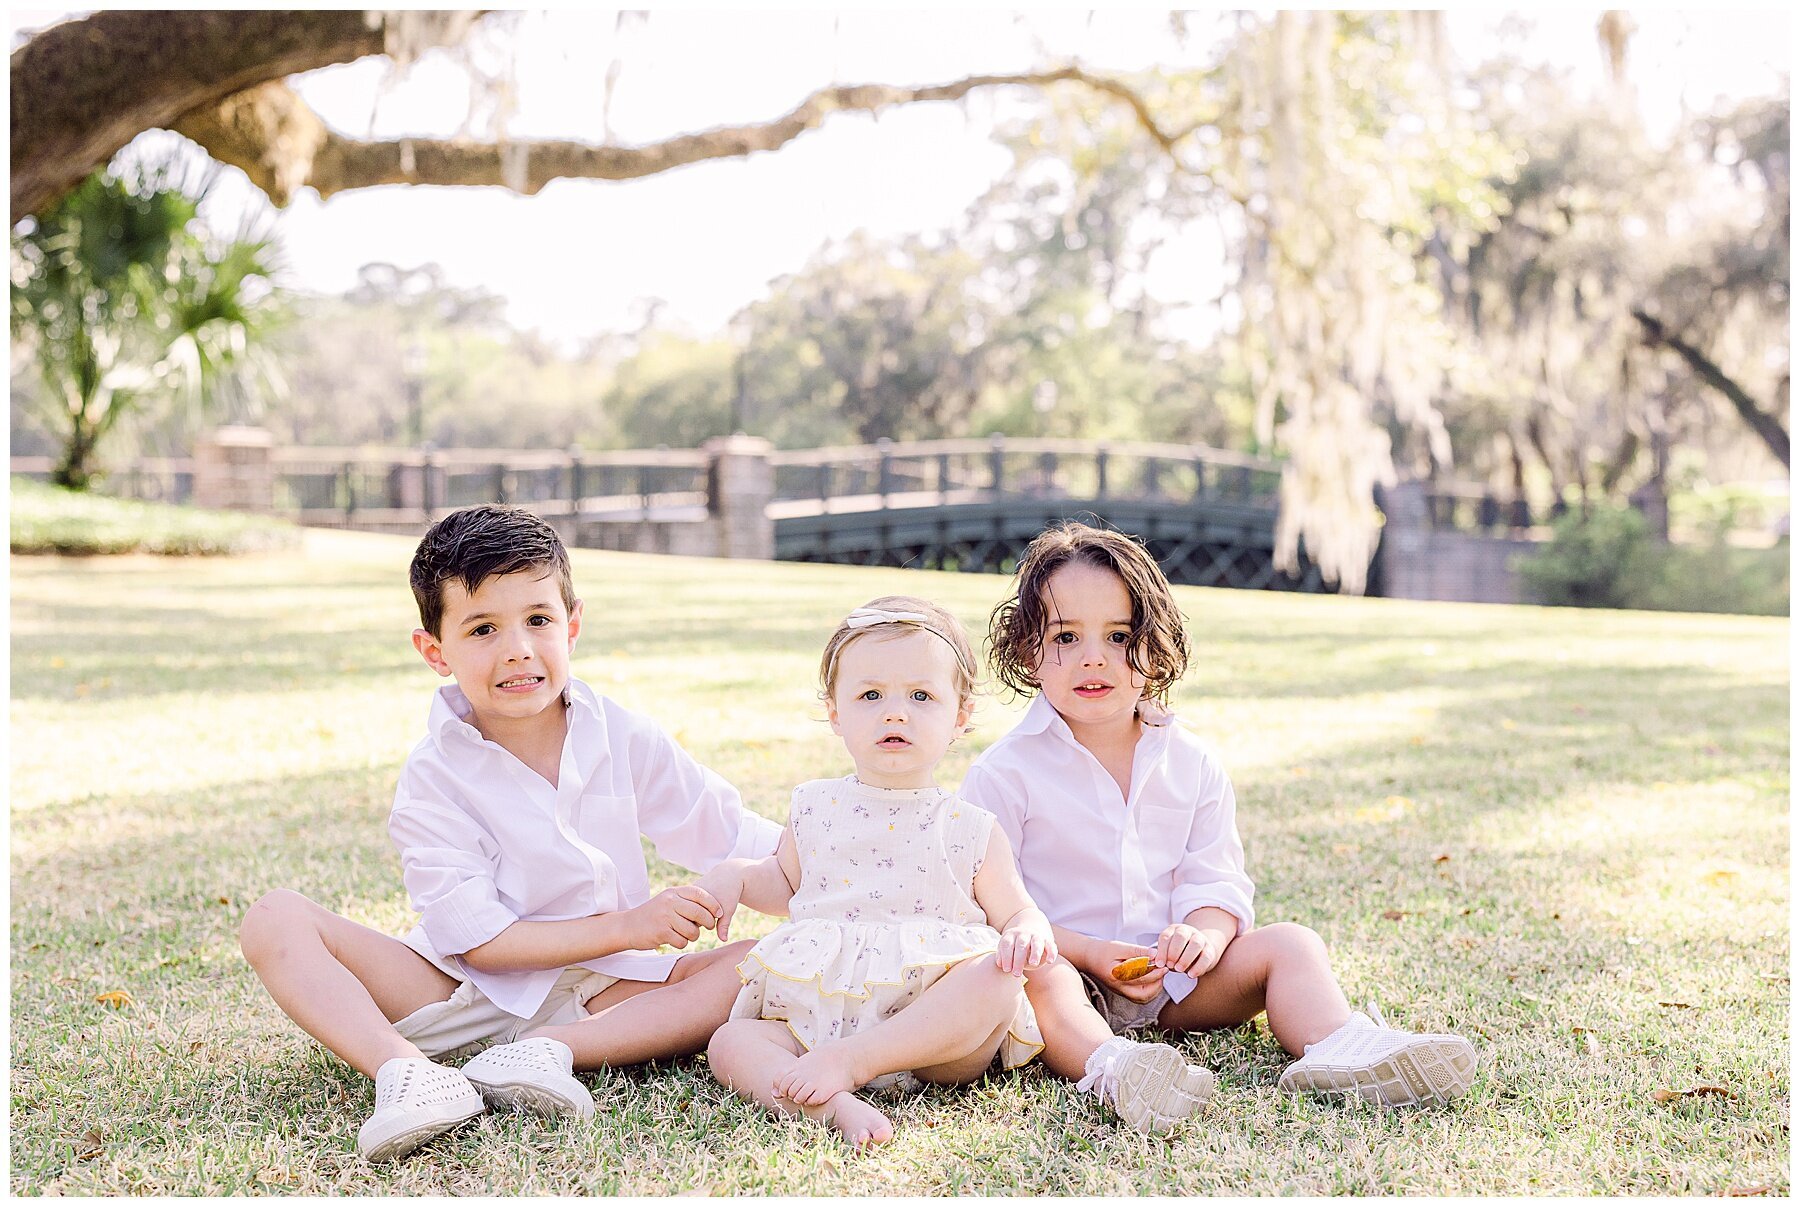 Katherine_Ives_Photography_Sallah_Palmetto_Bluff_Family_Session_5.JPG